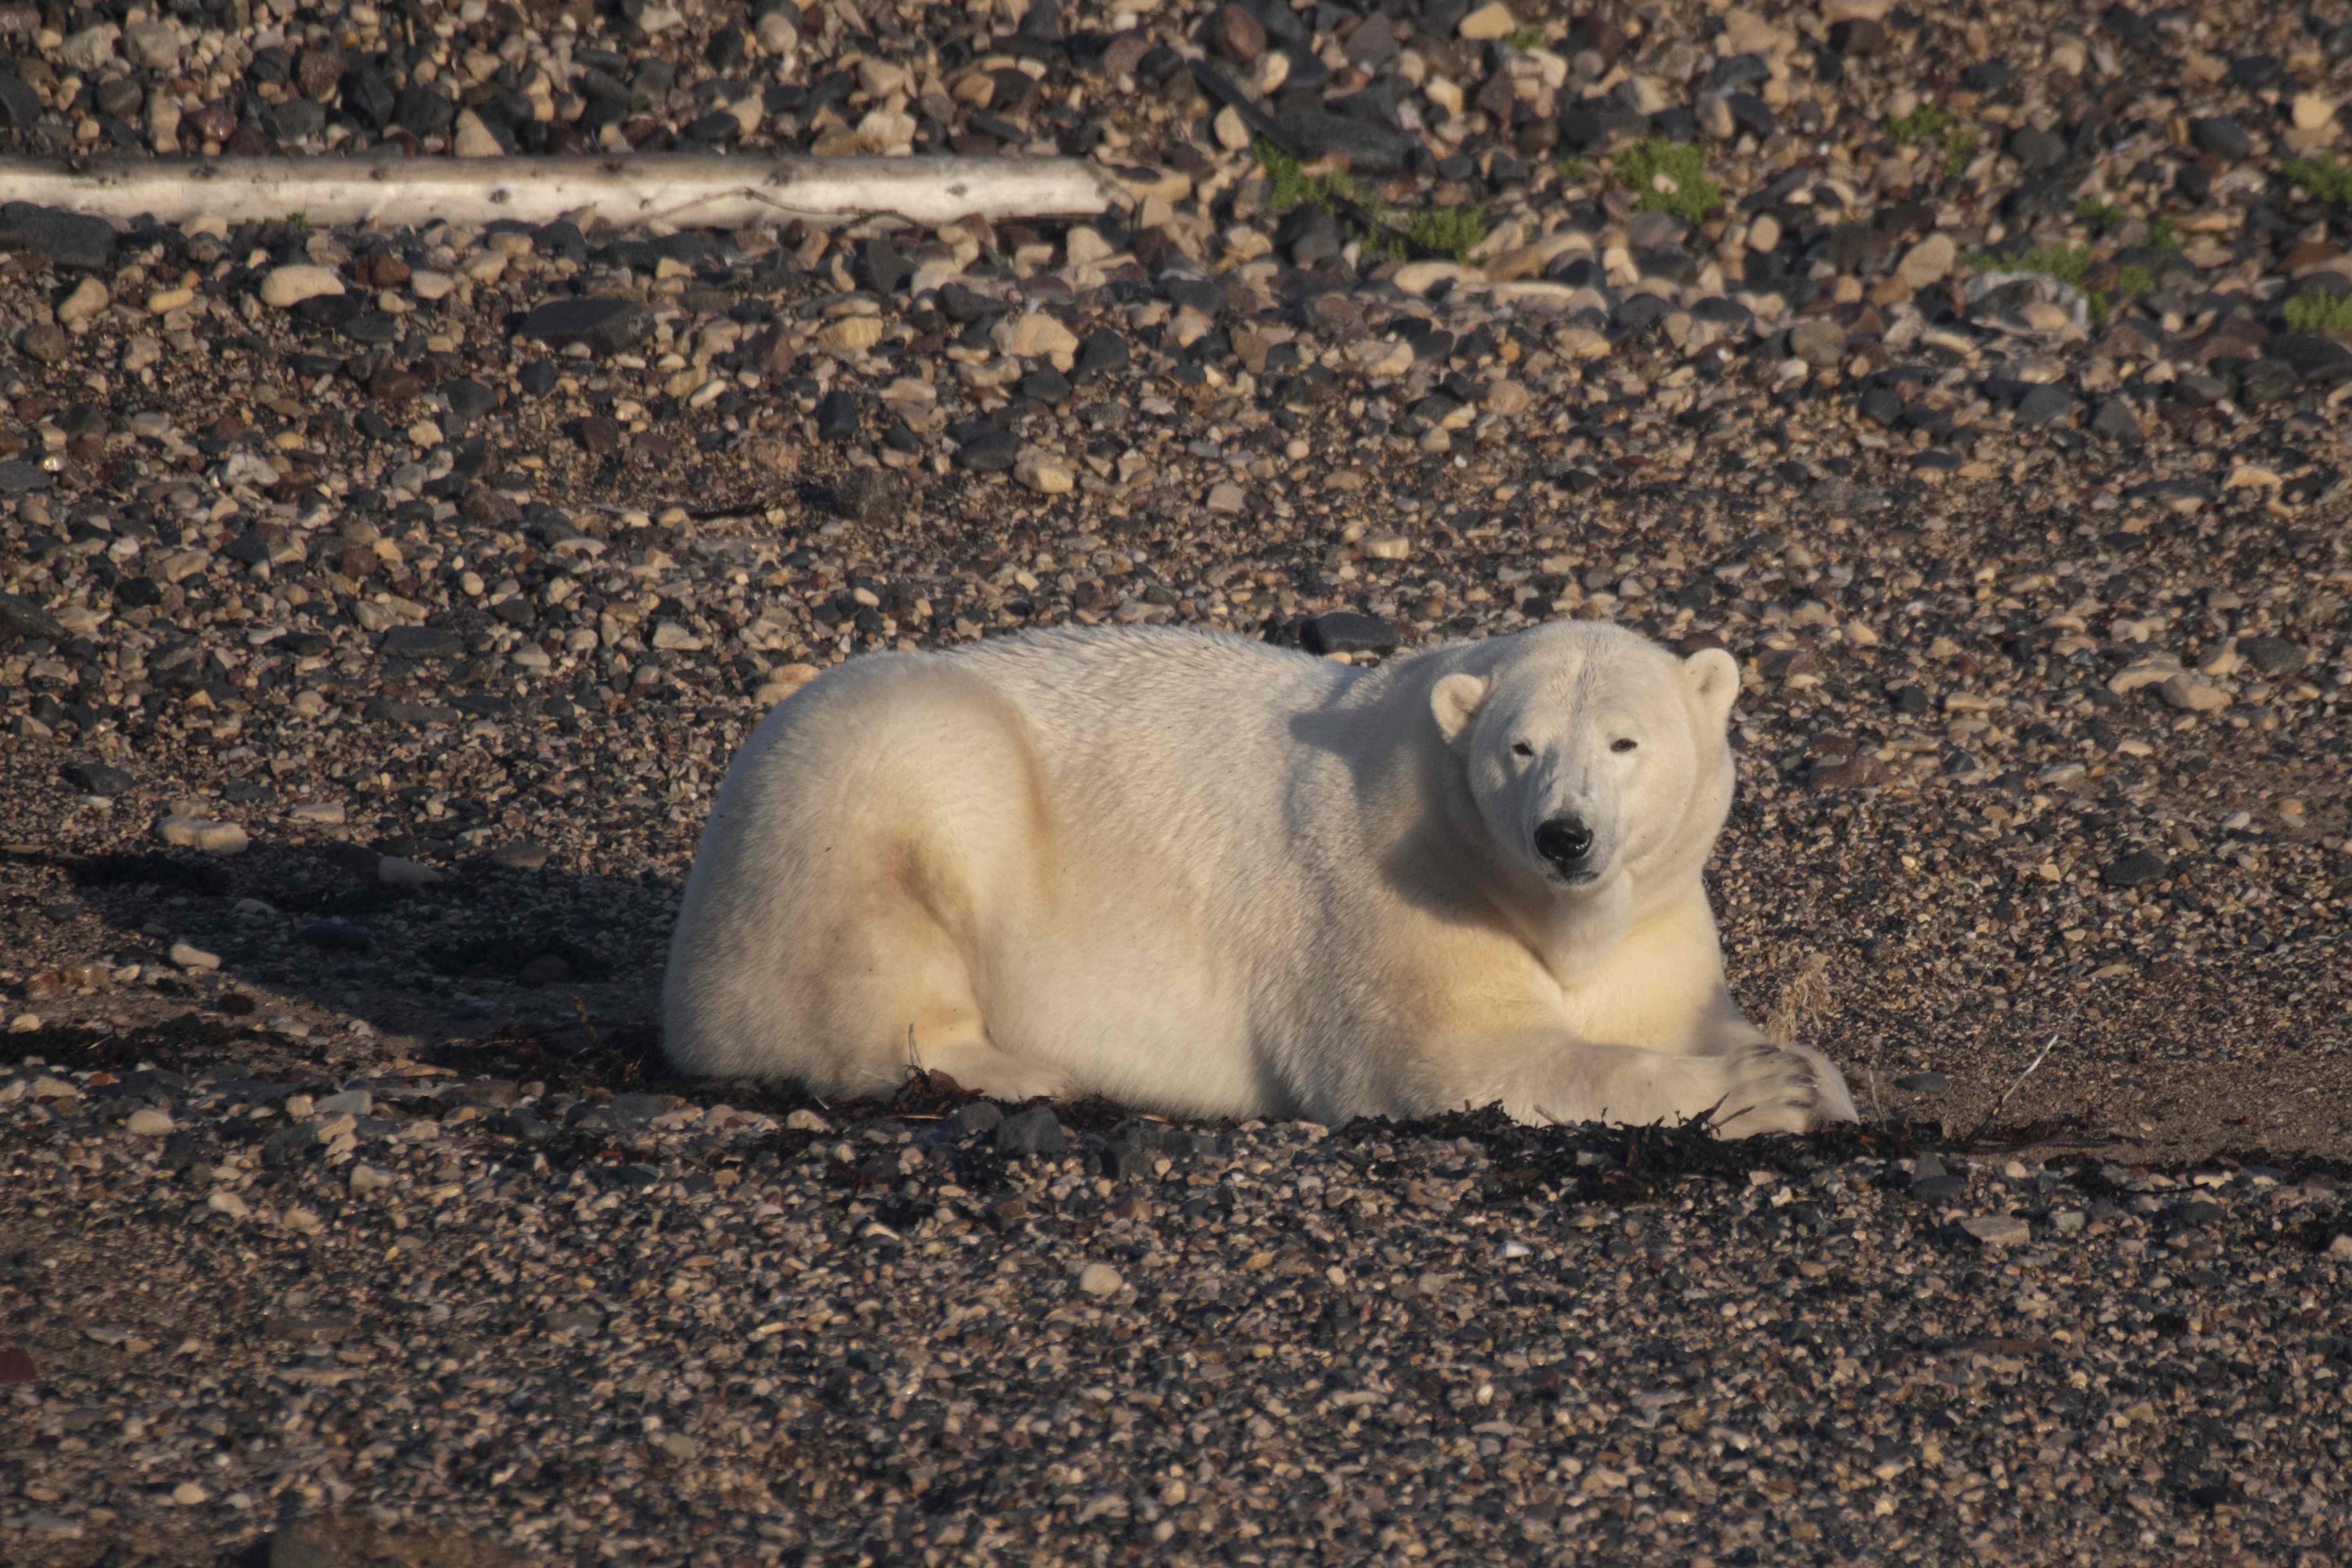 Polar Bears Encroach on Human Settlements in Russia, Canada Due to Climate  Change Ice, Habitat Loss